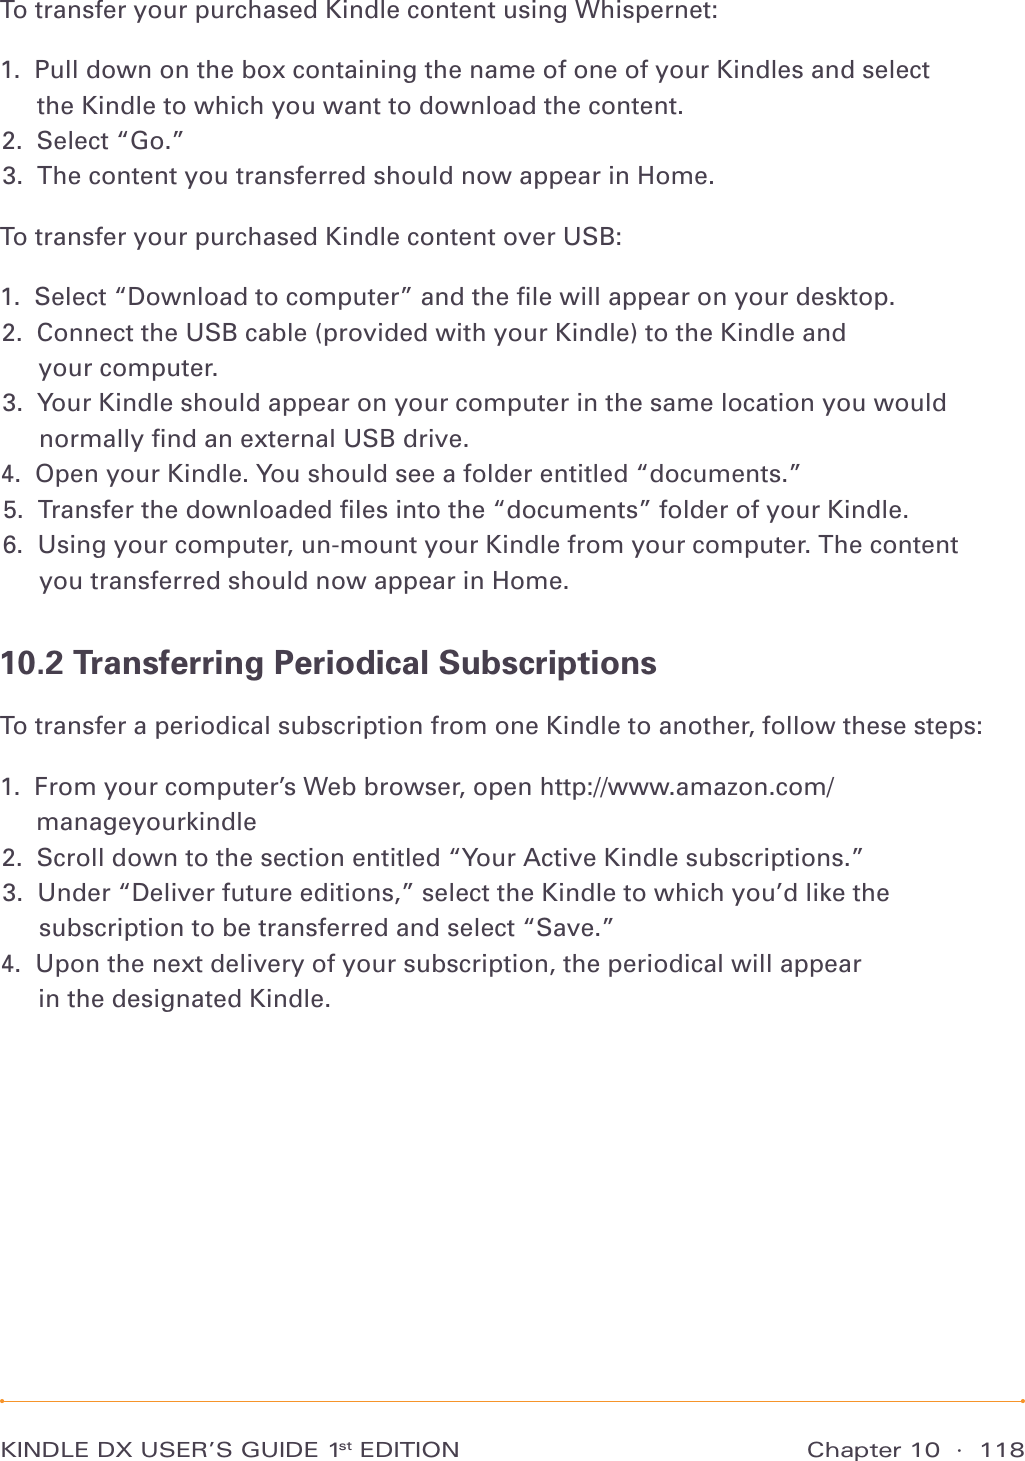 Chapter 10  ·  118KINDLE DX USER’S GUIDE 1st EDITIONTo transfer your purchased Kindle content using Whispernet:1.   Pull down on the box containing the name of one of your Kindles and select  the Kindle to which you want to download the content. 2.   Select “Go.” 3.  The content you transferred should now appear in Home. To transfer your purchased Kindle content over USB:1.  Select “Download to computer” and the ﬁle will appear on your desktop. 2.   Connect the USB cable (provided with your Kindle) to the Kindle and  your computer. 3.   Your Kindle should appear on your computer in the same location you would normally ﬁnd an external USB drive. 4.  Open your Kindle. You should see a folder entitled “documents.” 5.  Transfer the downloaded ﬁles into the “documents” folder of your Kindle. 6.   Using your computer, un-mount your Kindle from your computer. The content  you transferred should now appear in Home. 10.2 Transferring Periodical SubscriptionsTo transfer a periodical subscription from one Kindle to another, follow these steps:1.   From your computer’s Web browser, open http://www.amazon.com/manageyourkindle 2.  Scroll down to the section entitled “Your Active Kindle subscriptions.” 3.   Under “Deliver future editions,” select the Kindle to which you’d like the subscription to be transferred and select “Save.” 4.   Upon the next delivery of your subscription, the periodical will appear  in the designated Kindle. 